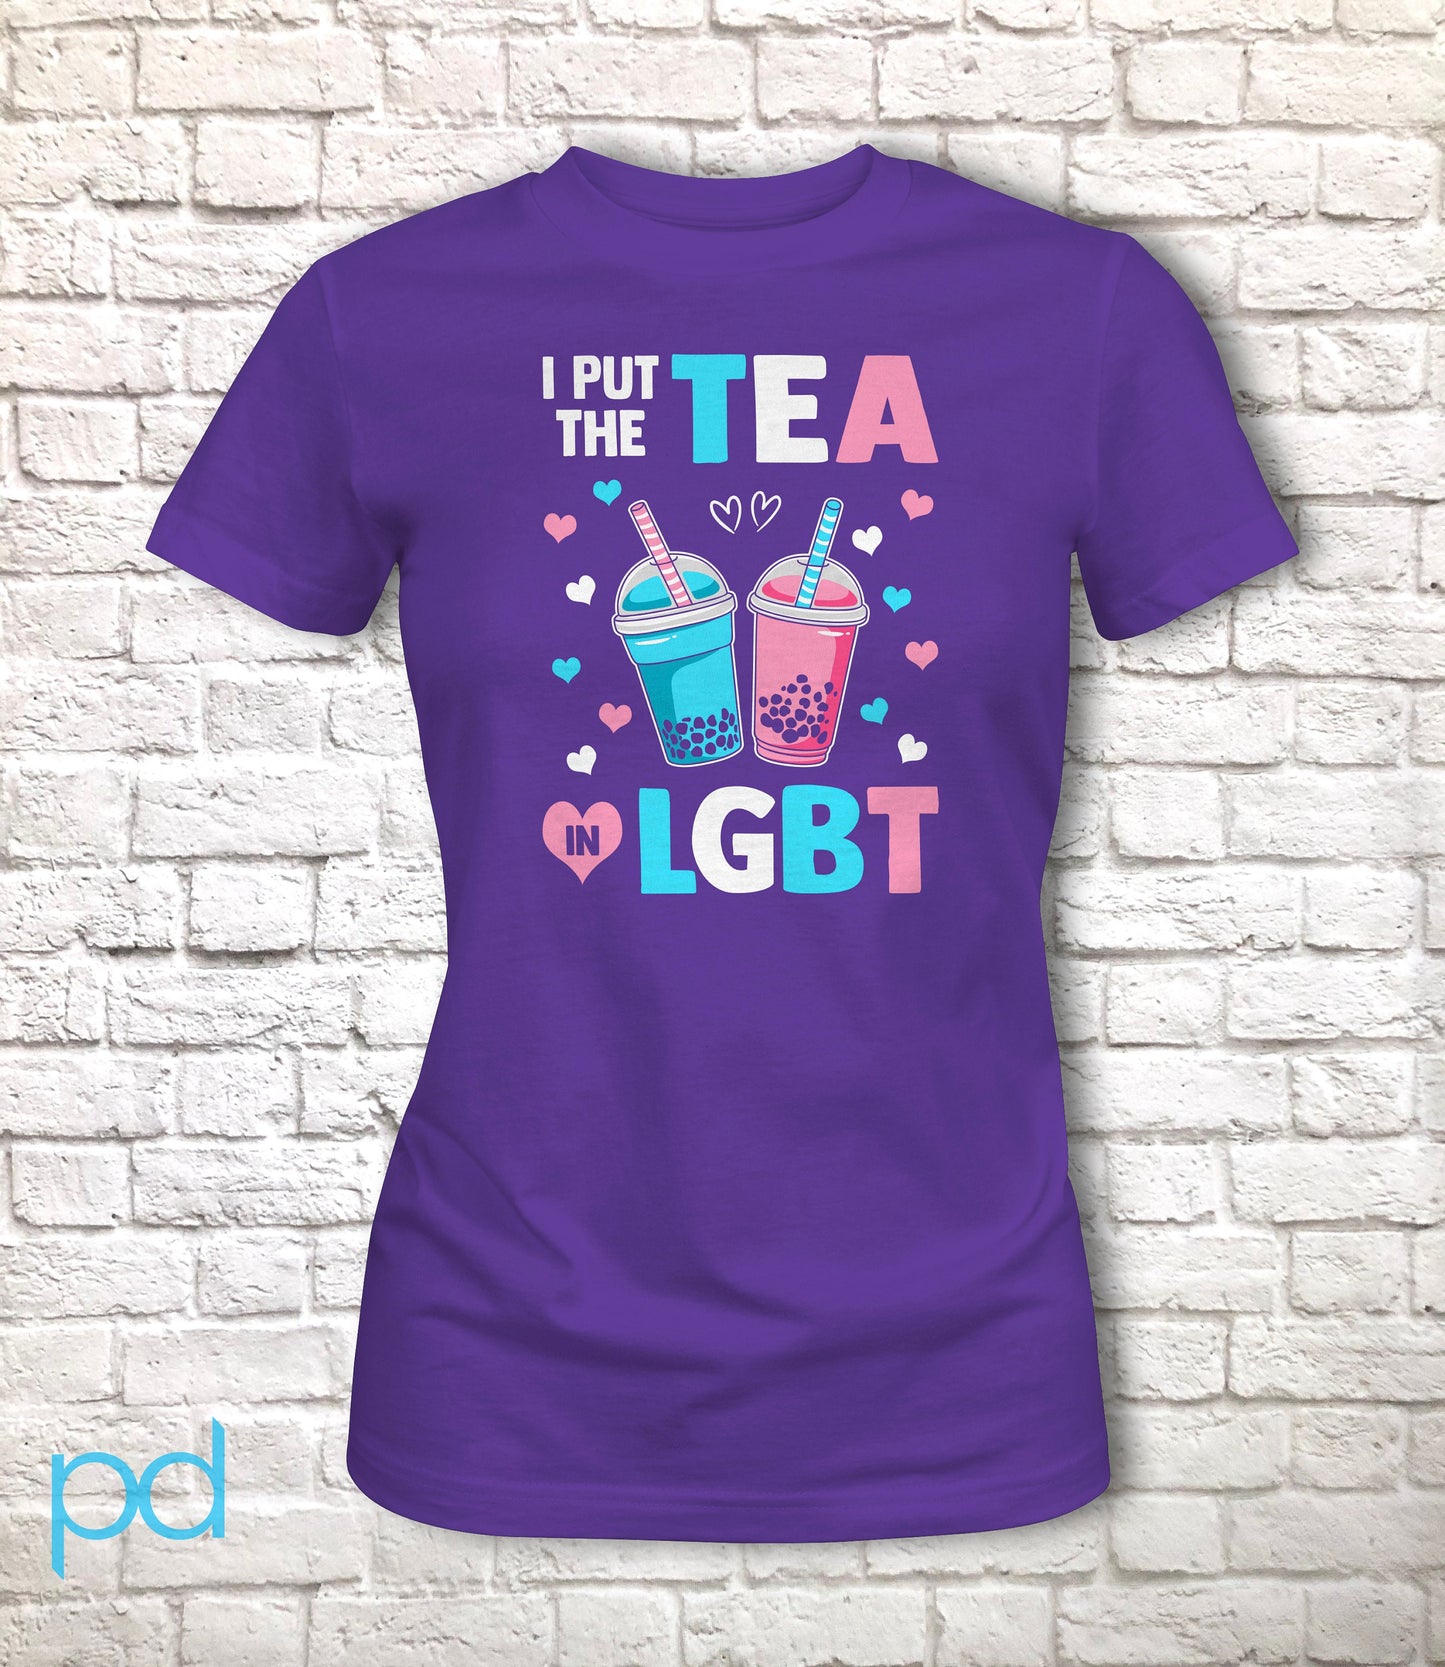 I Put The Tea In LGBT Shirt Fitted Cut Style, Funny Trans Gift Idea, Humorous Transgender Bubble Tea Boba Pun Fitted Tee T-Shirt Top